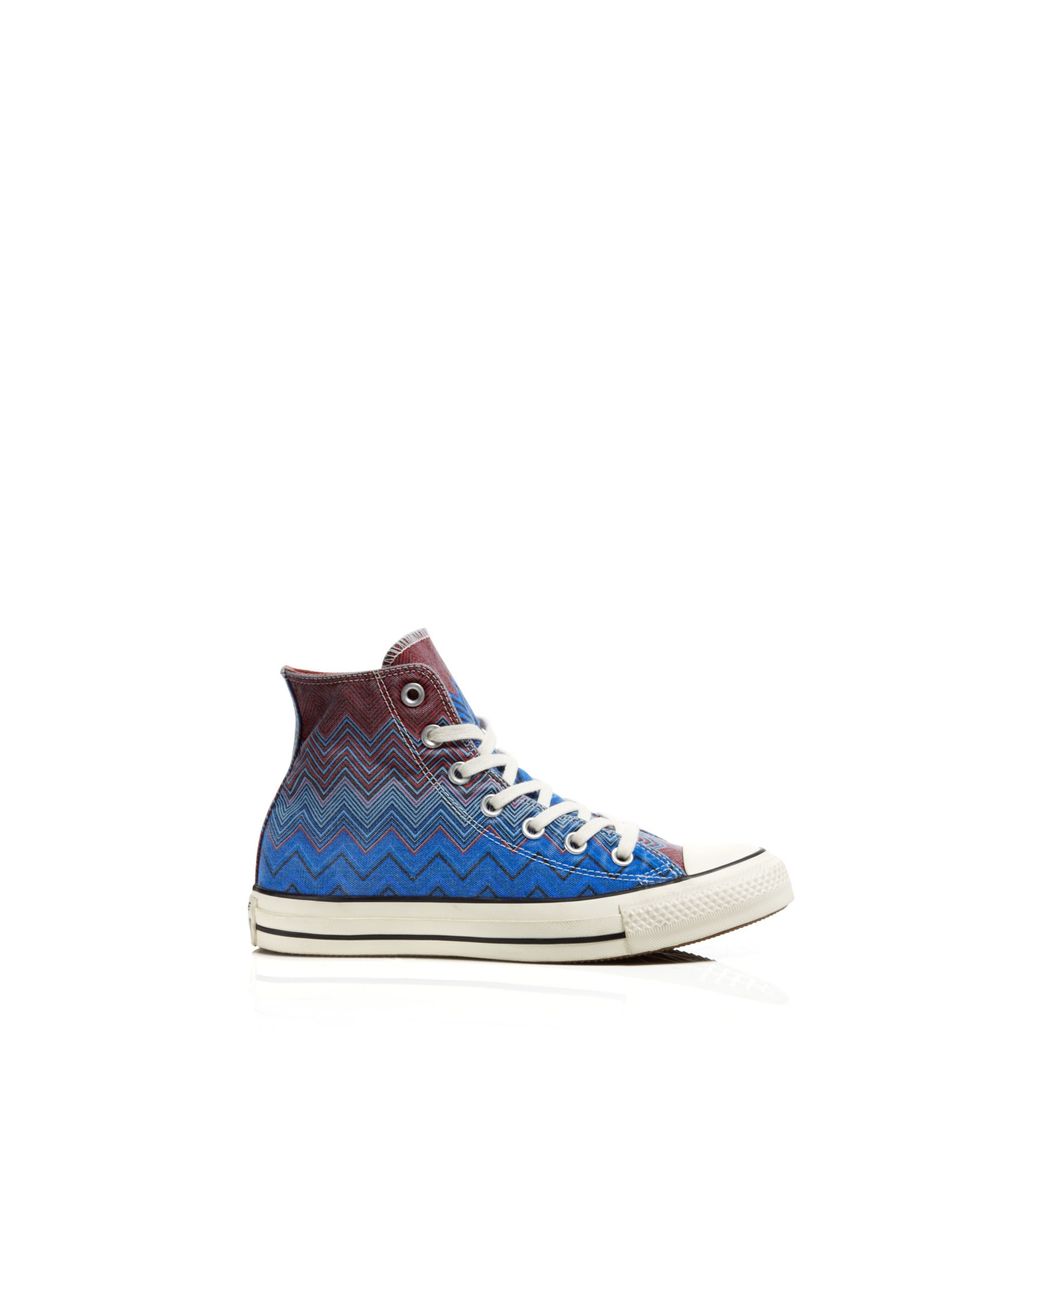 Converse Chuck Taylor All Star Missoni High Top Sneakers in Blue Lyst